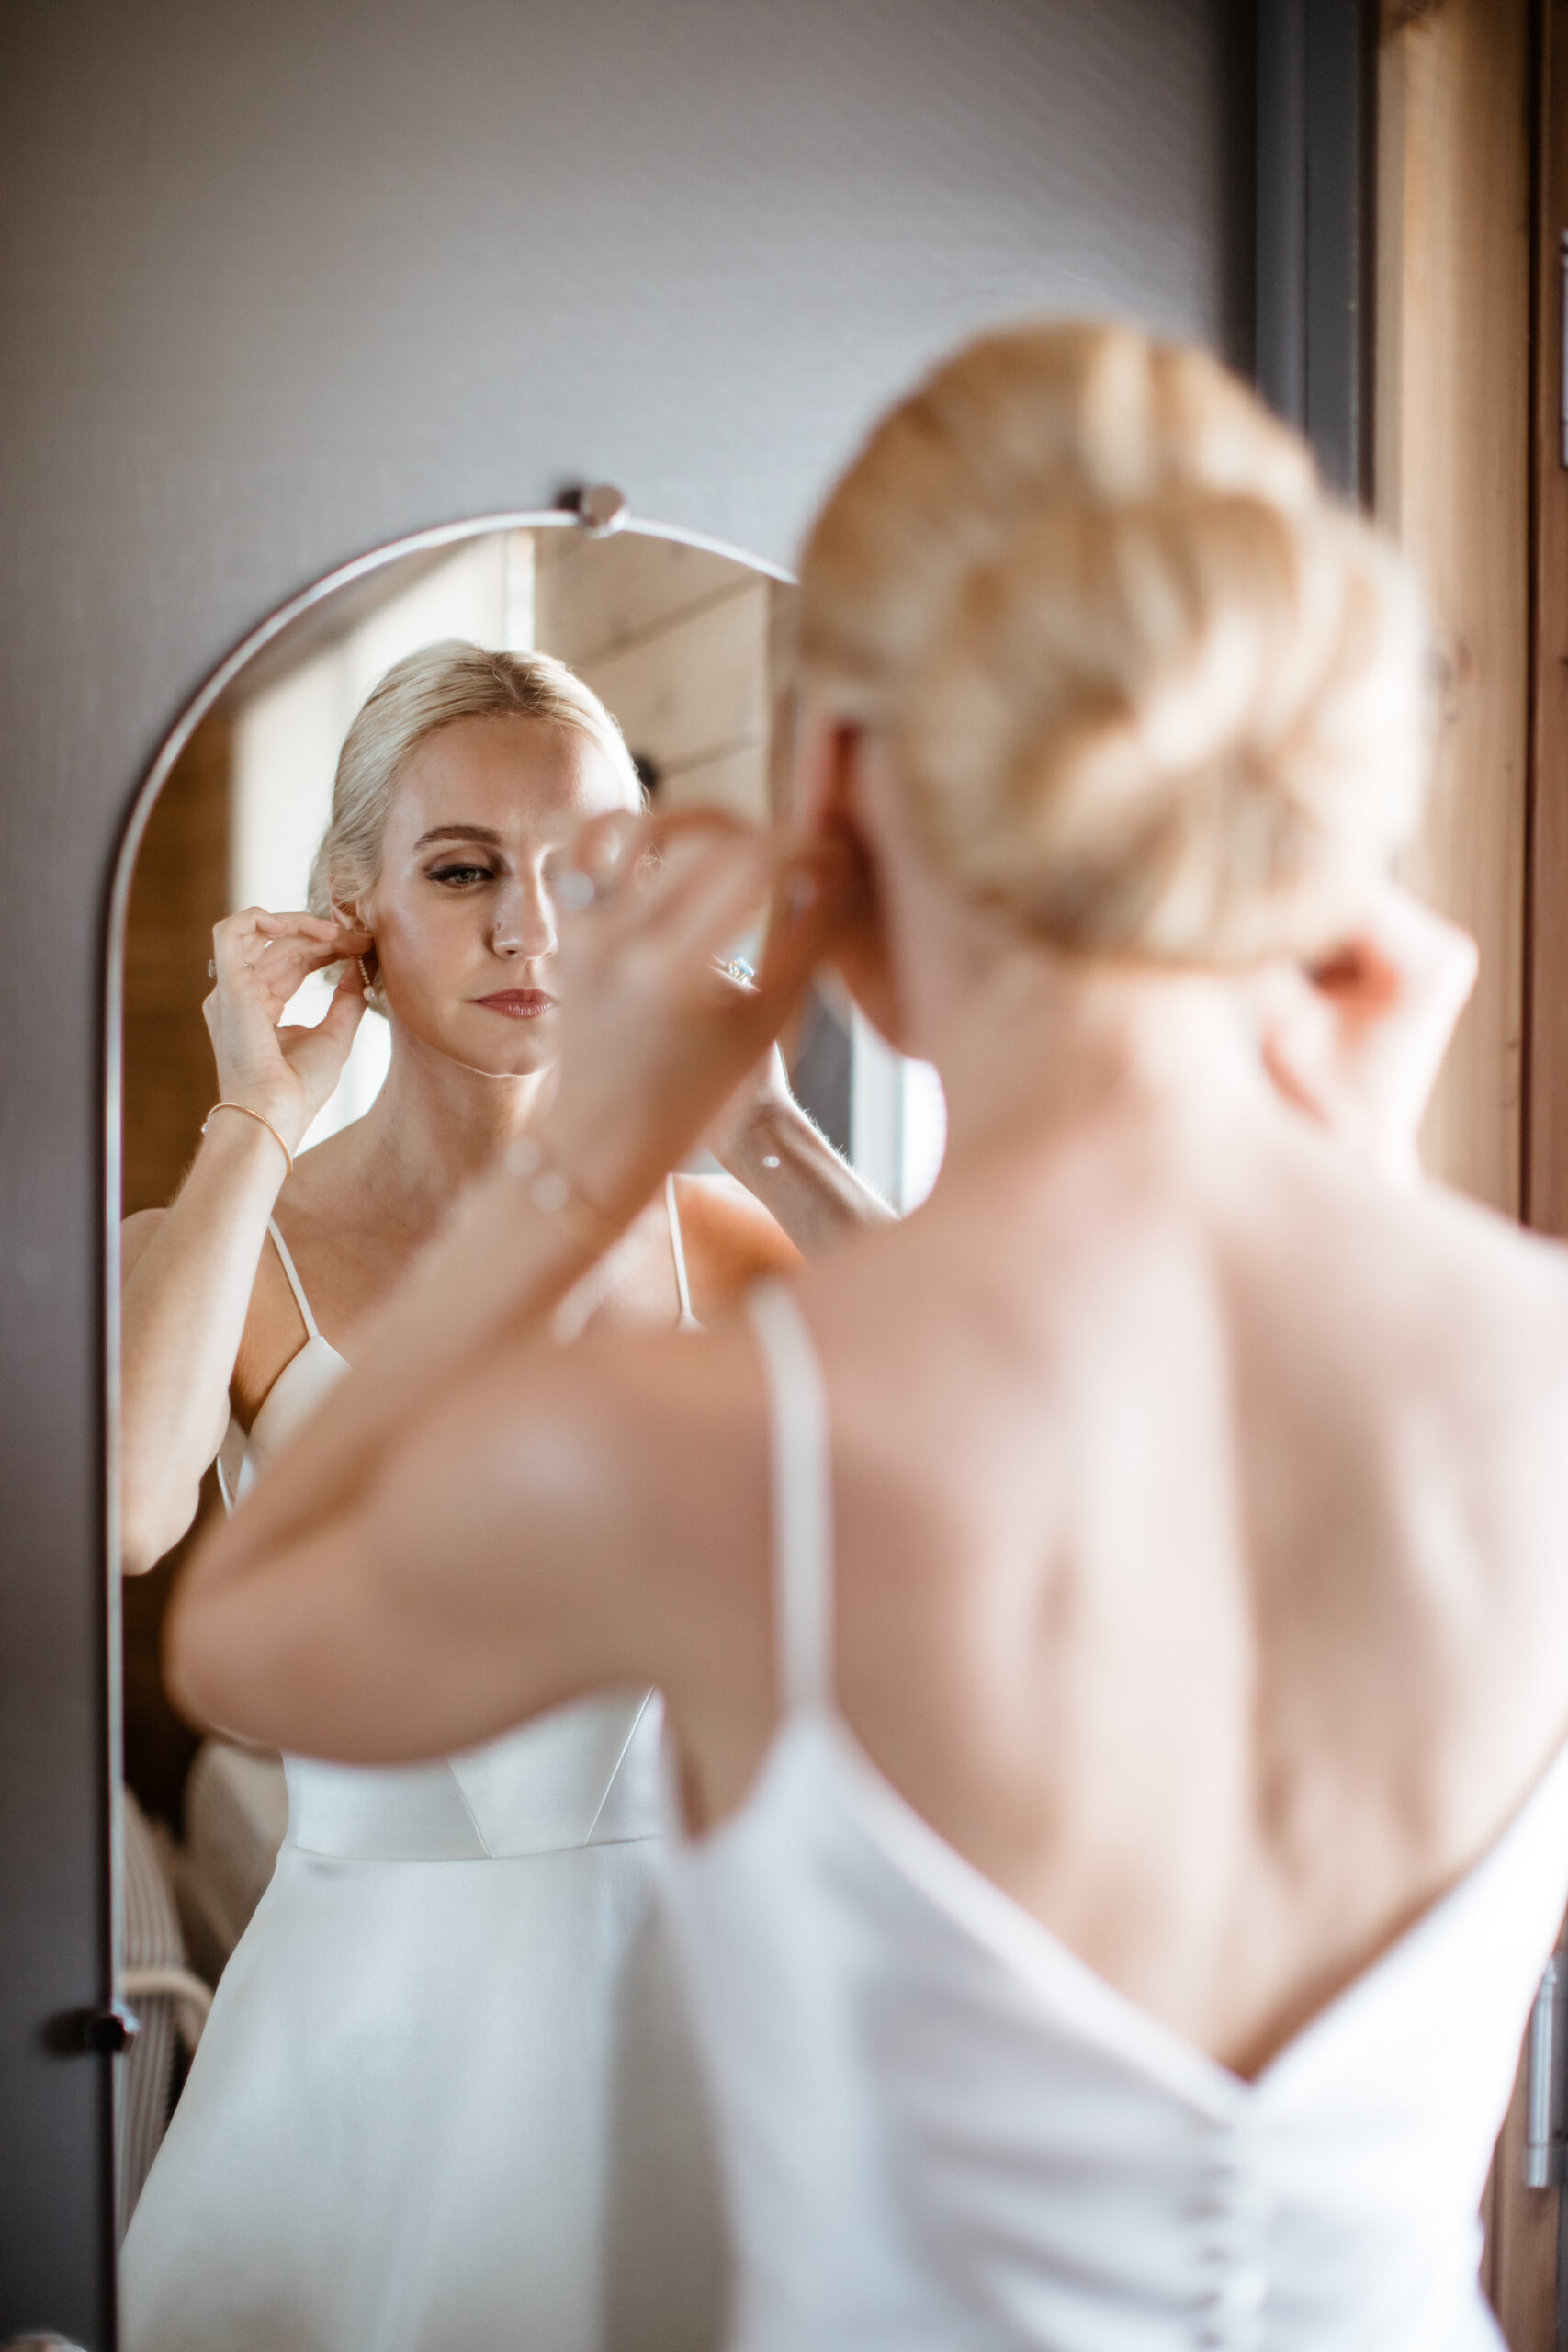 Stunning bride adds her final touch to prep before her winery wedding day!